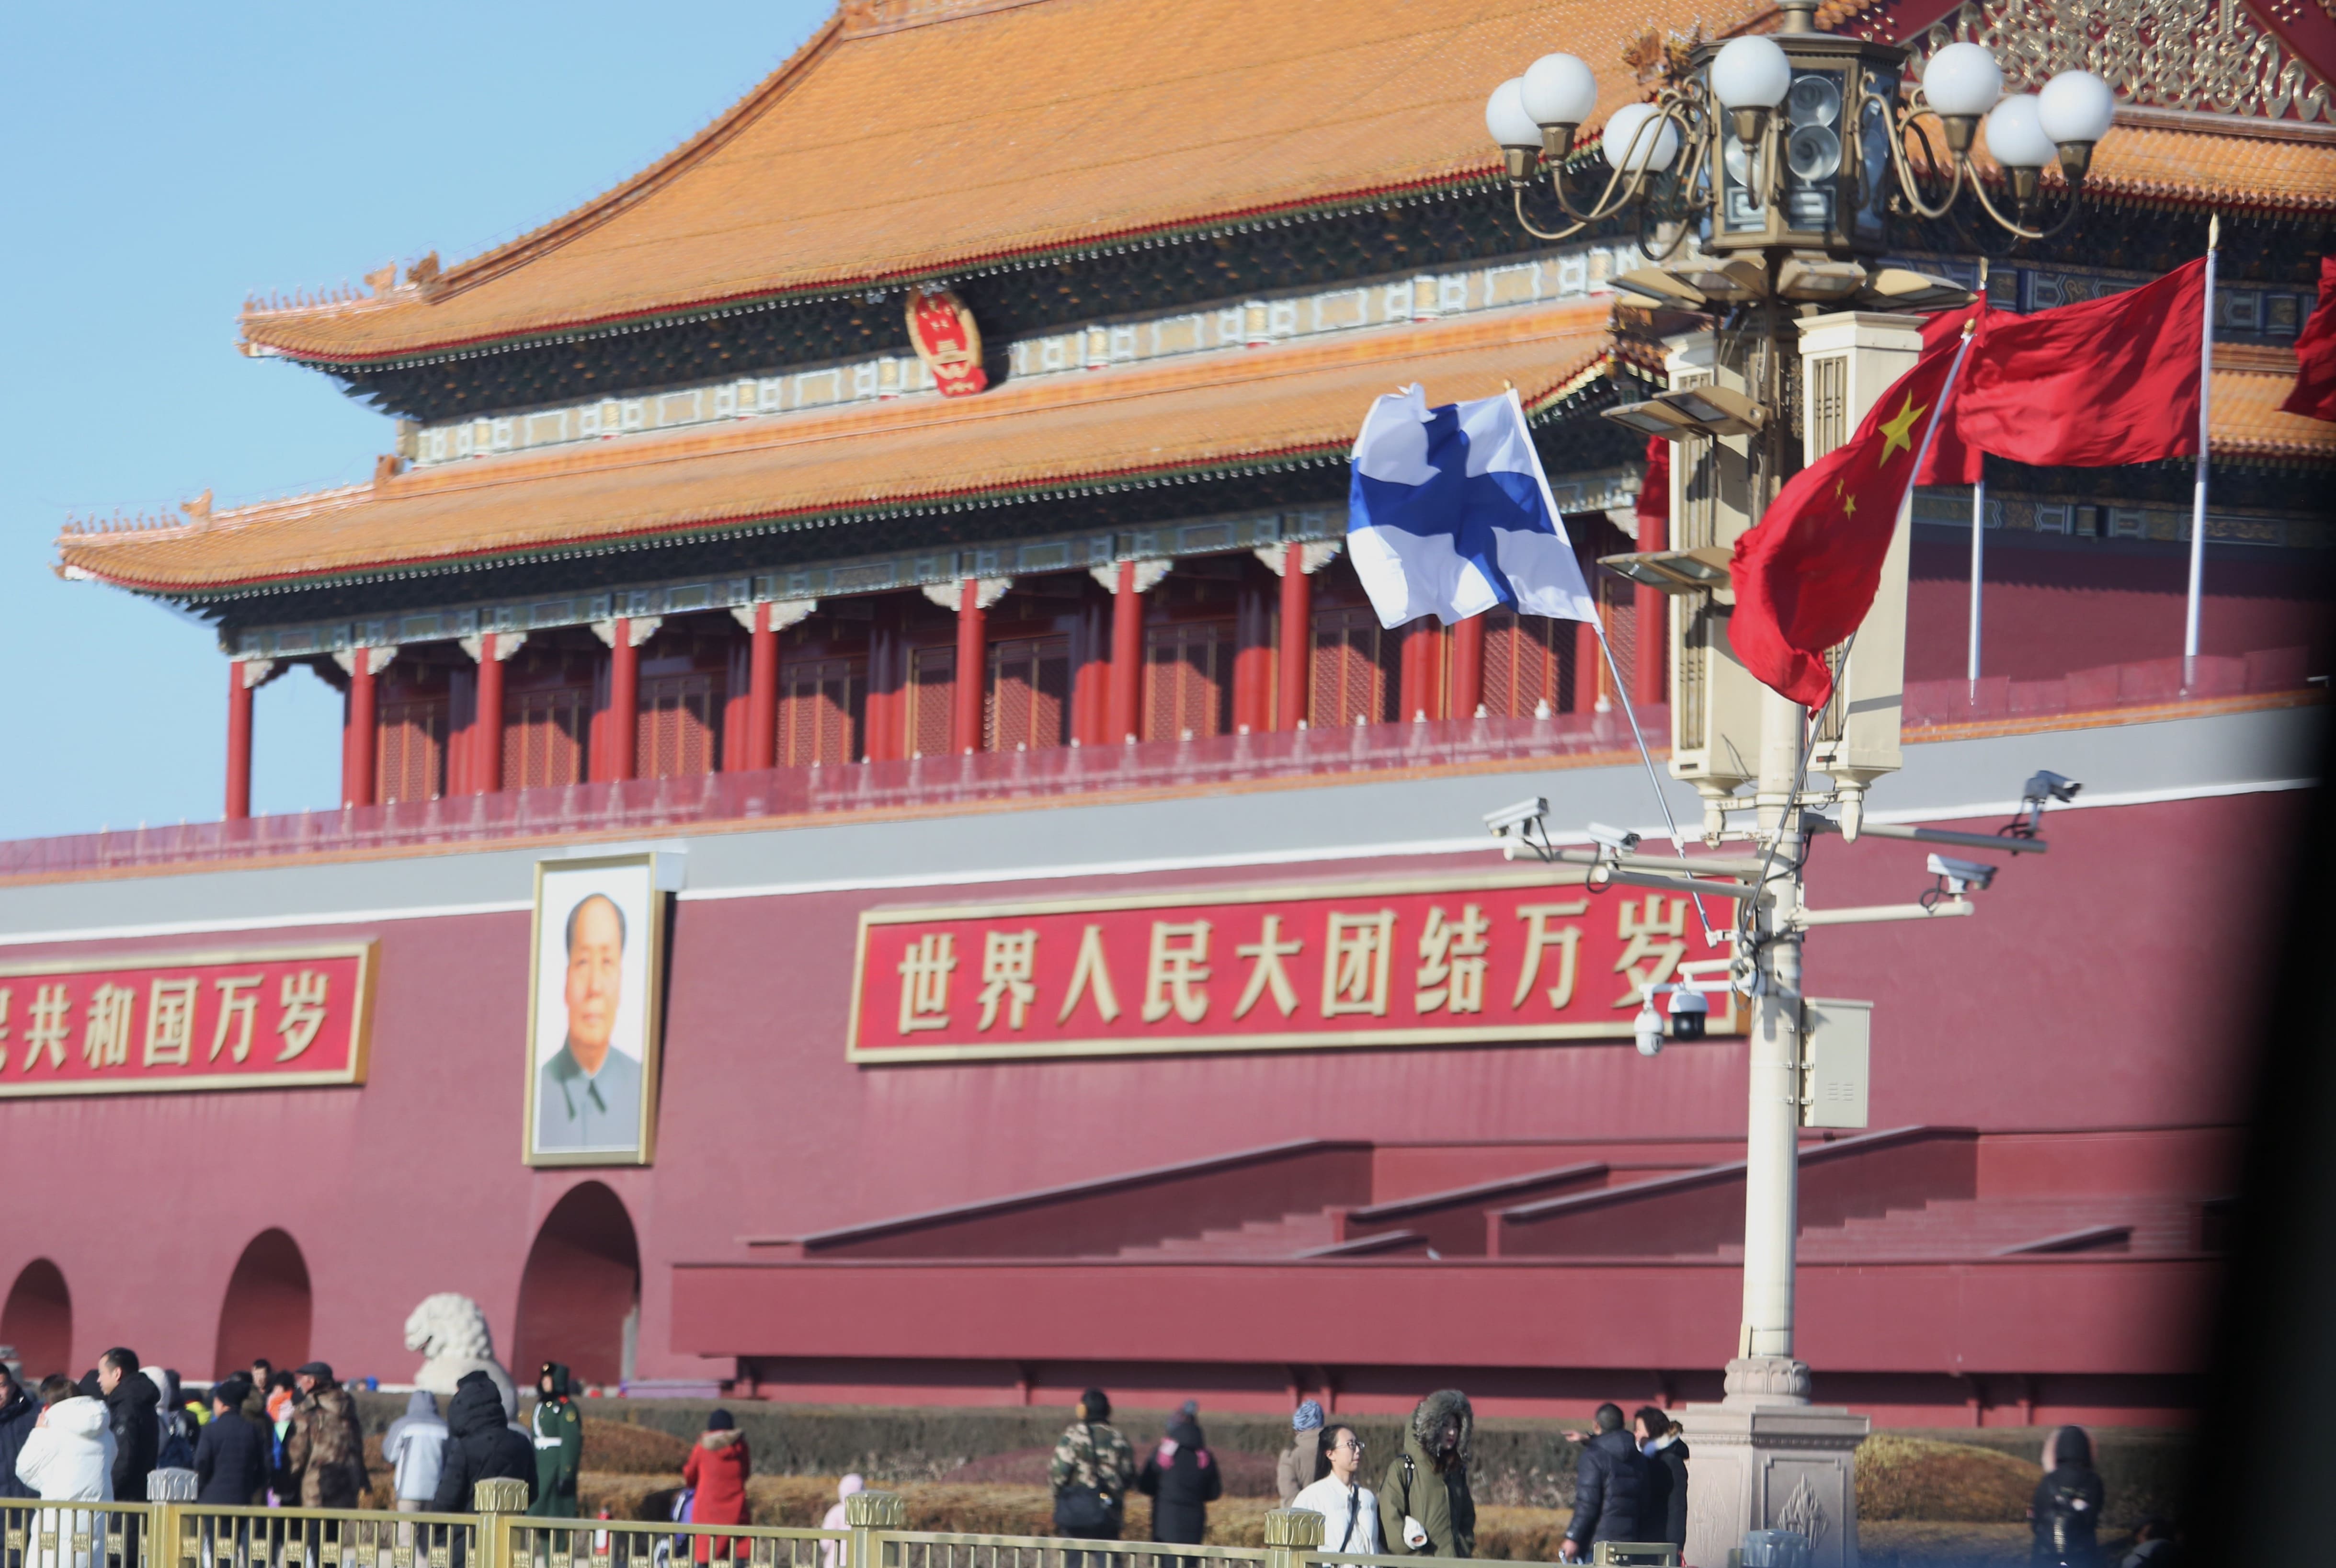 Finnish and Chinese flags in front of the Forbidden City